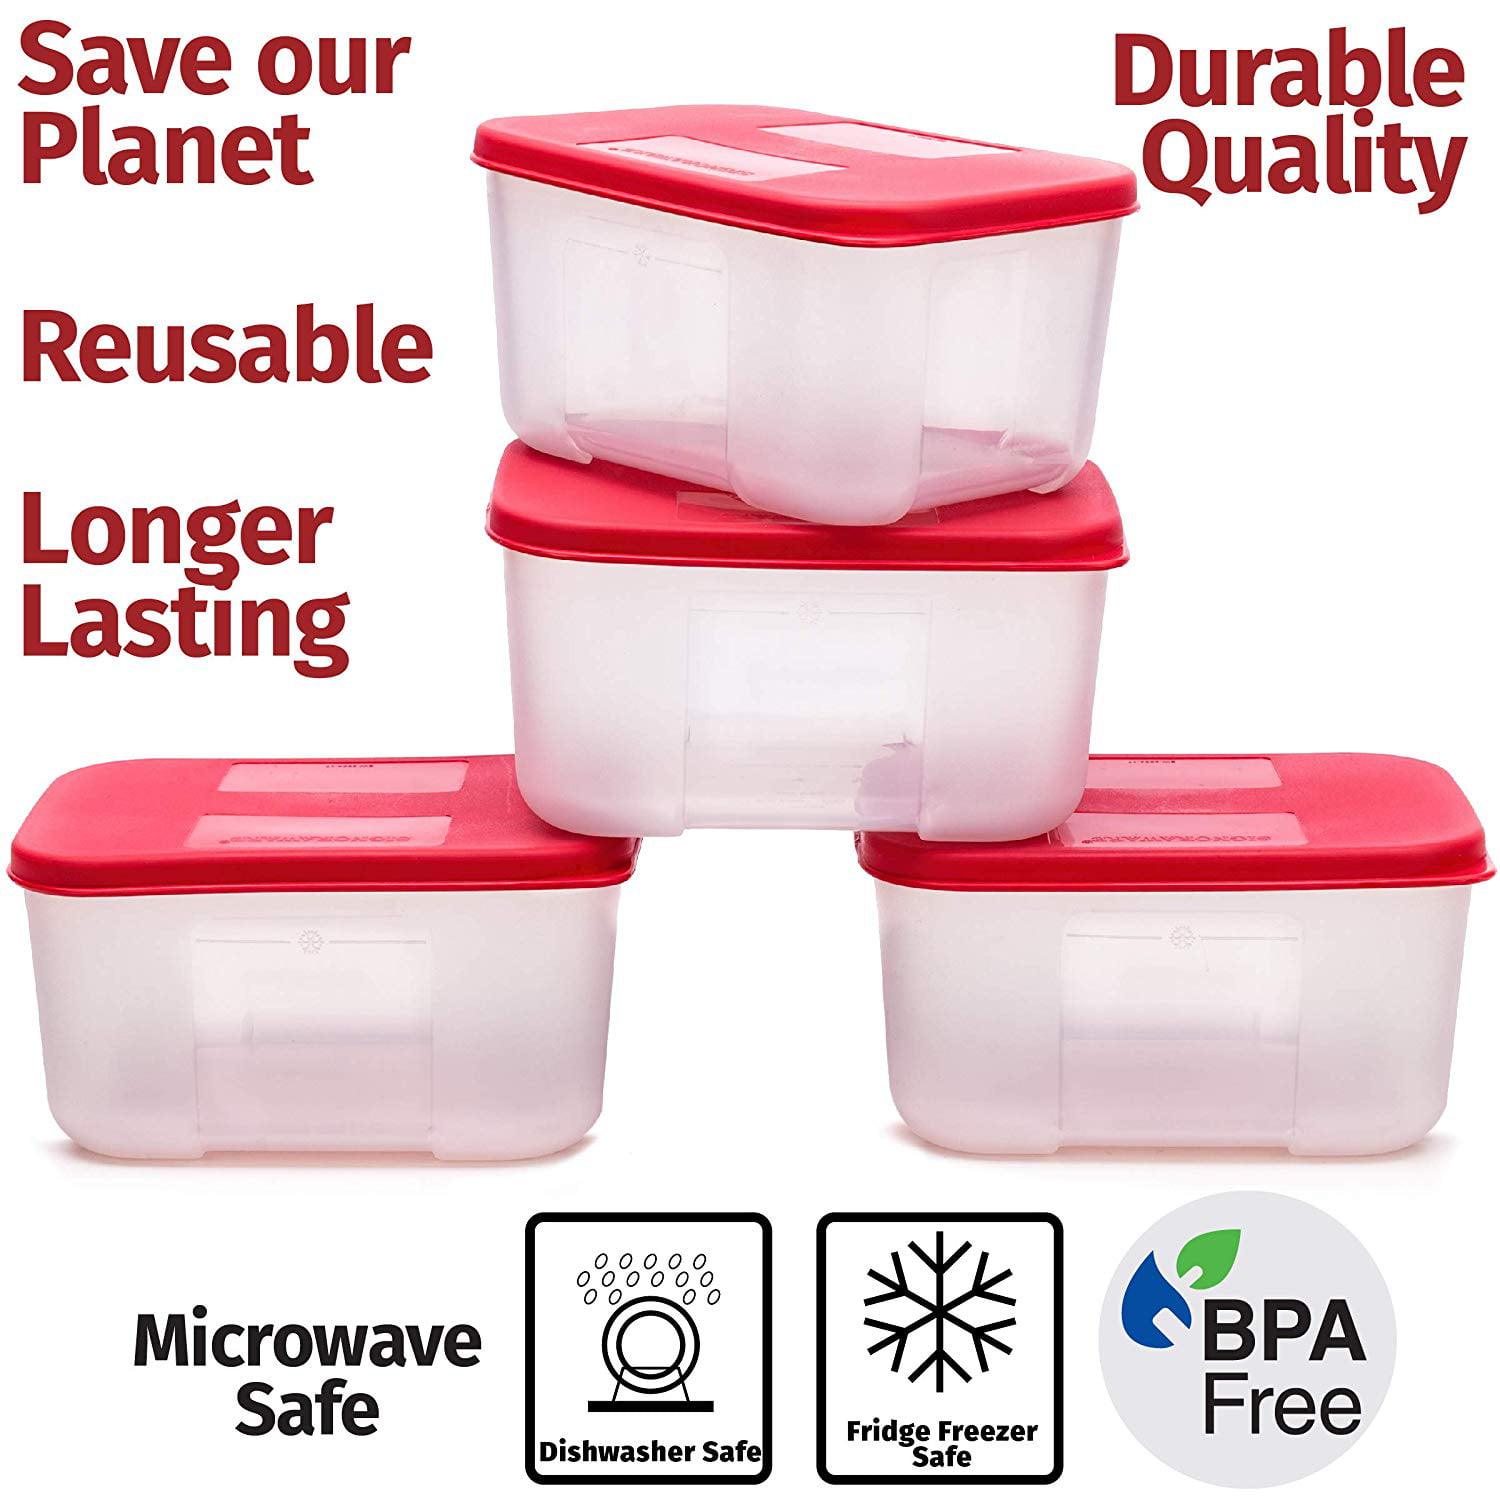 Tips for Choosing and Using Freezer Containers